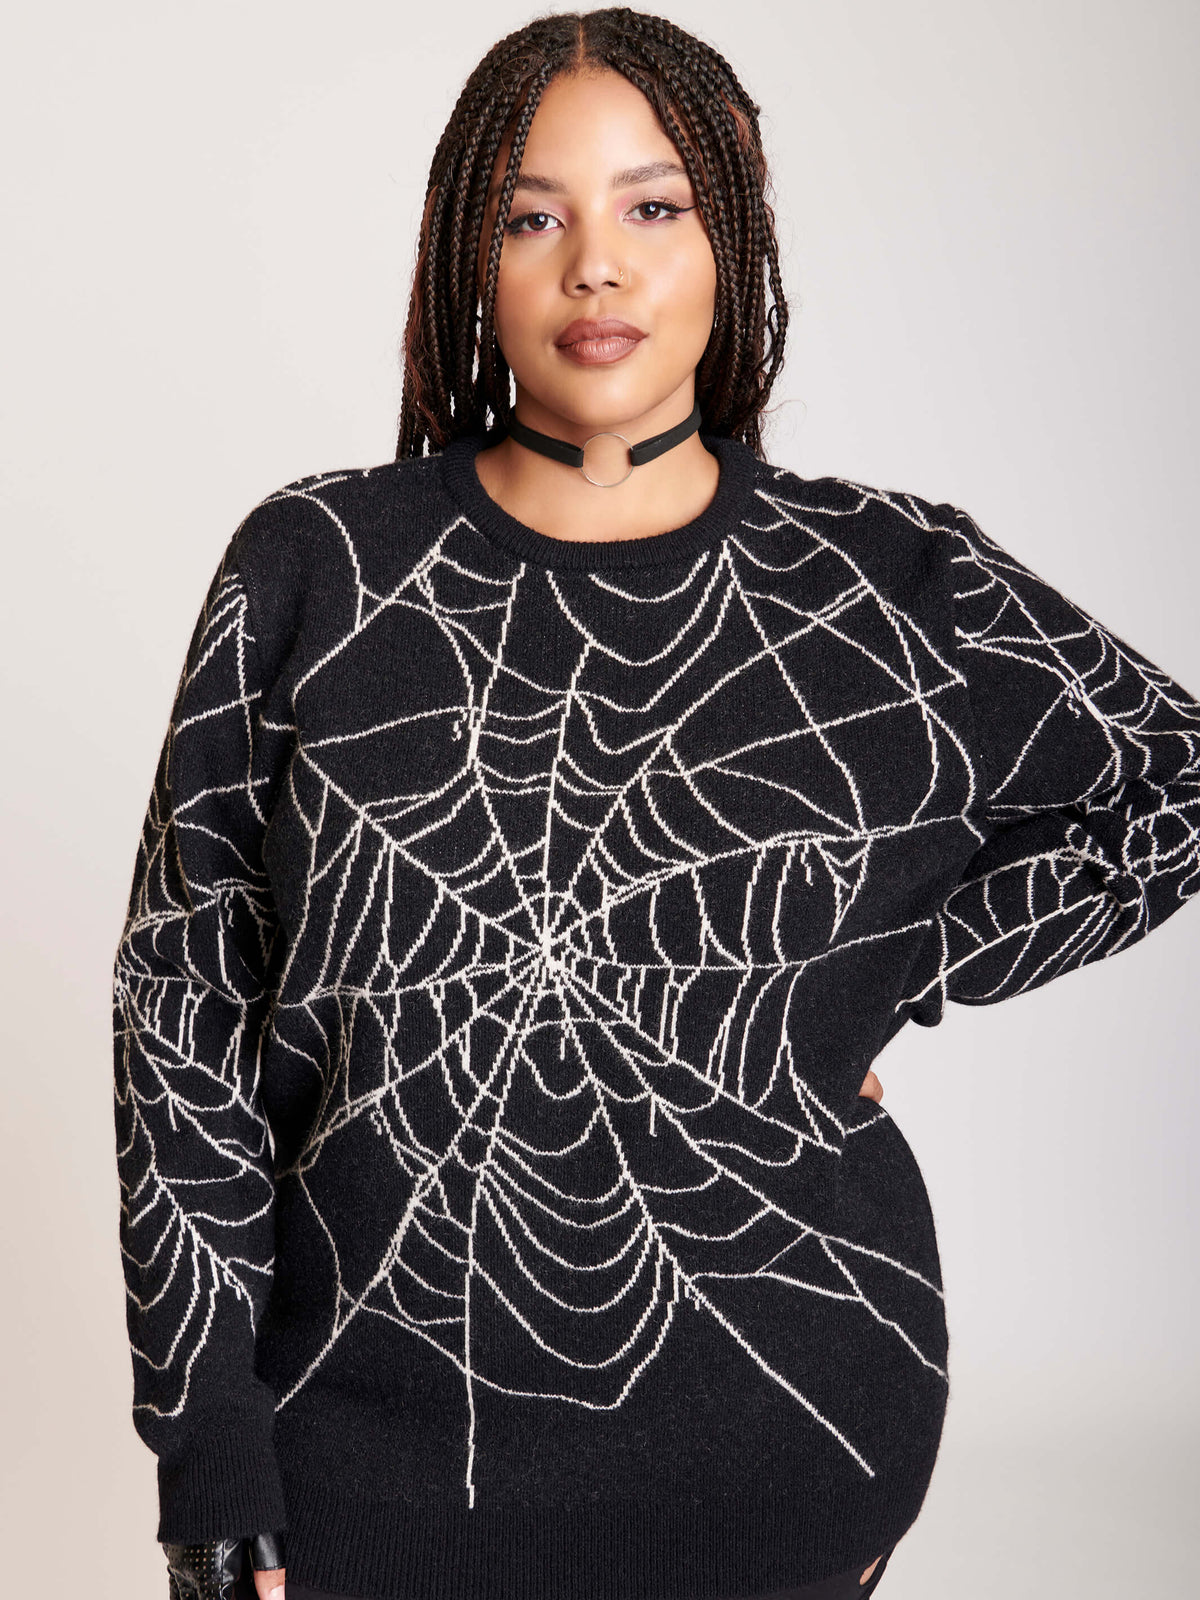 sweater with spiderweb motif on body and sleeves